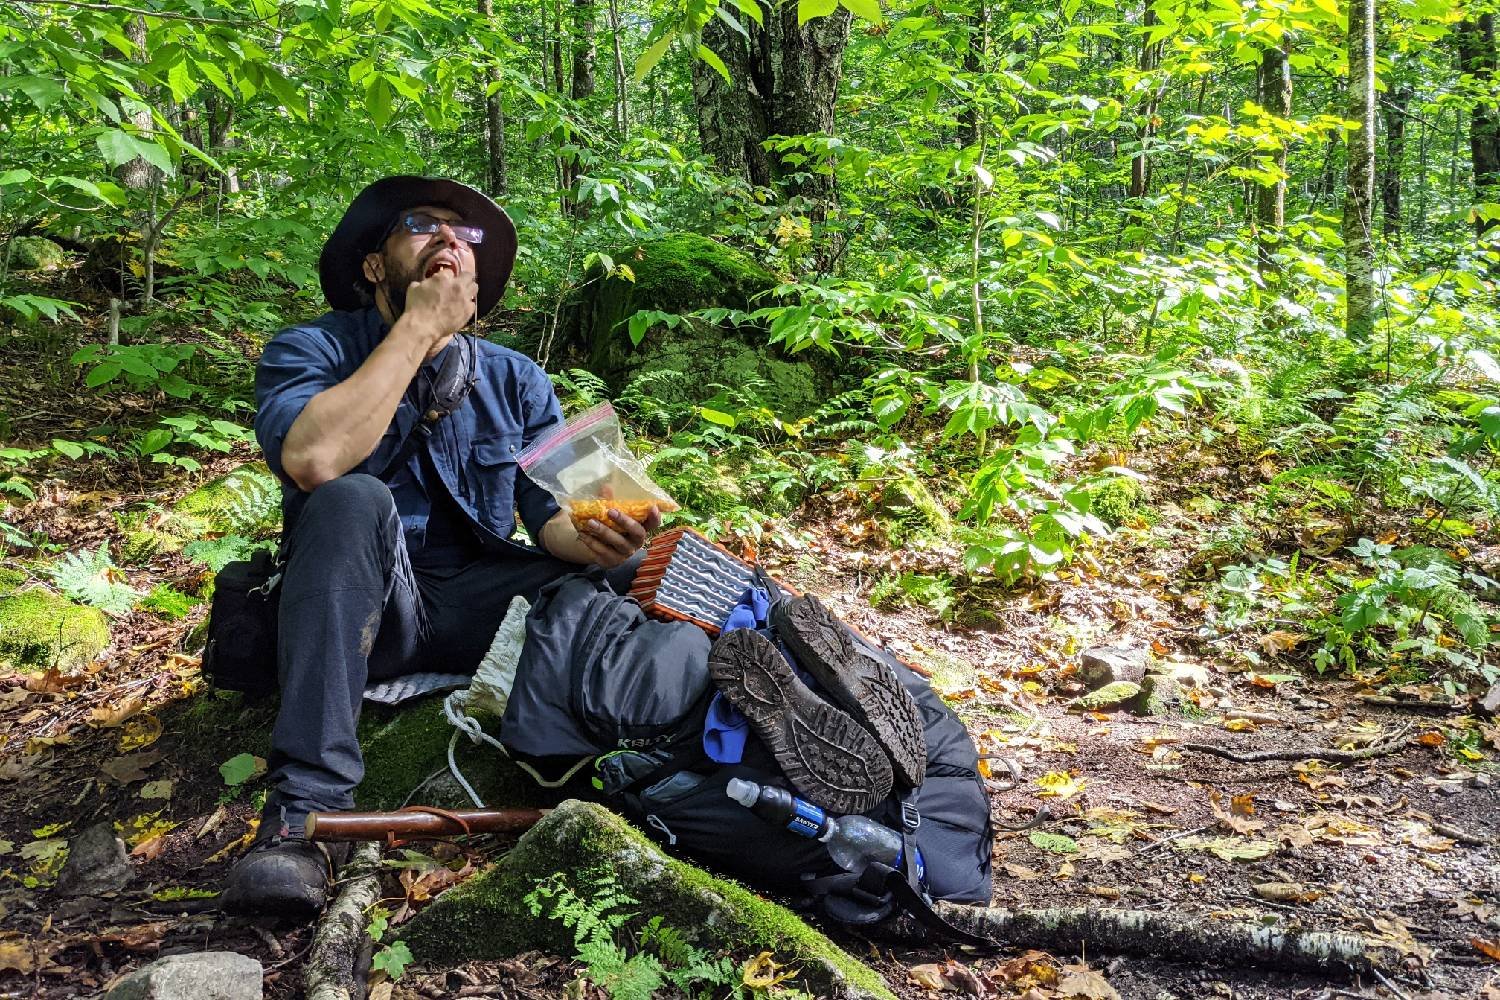 A hiker sitting on a rock eating a snack